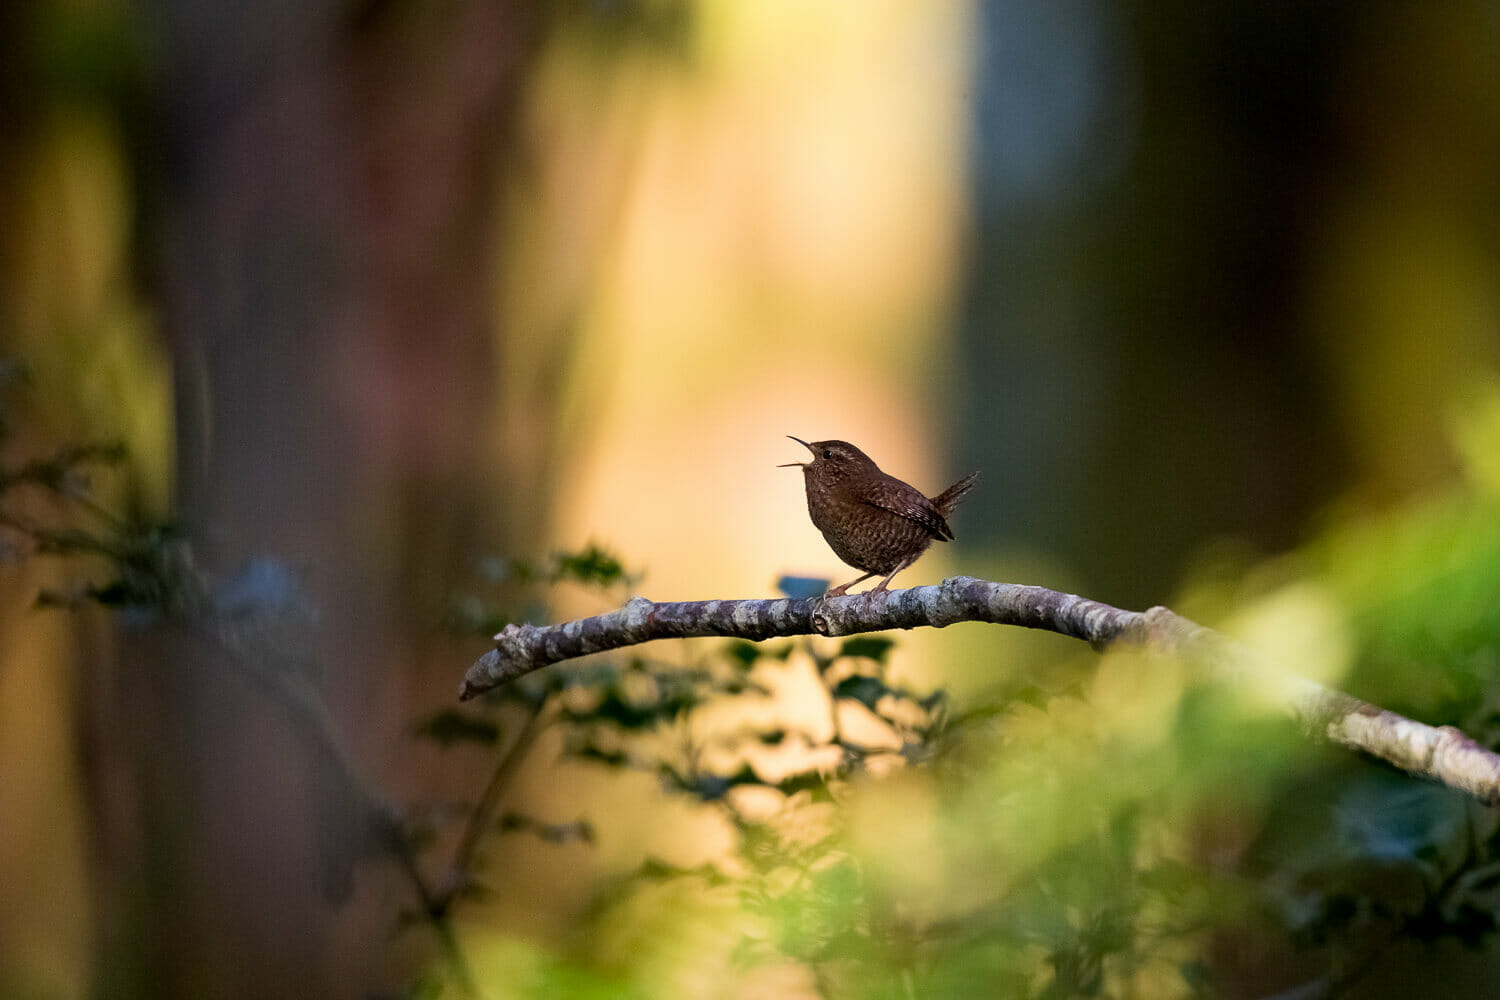 A Pacific wren sings from a branch in a sun dappled forest